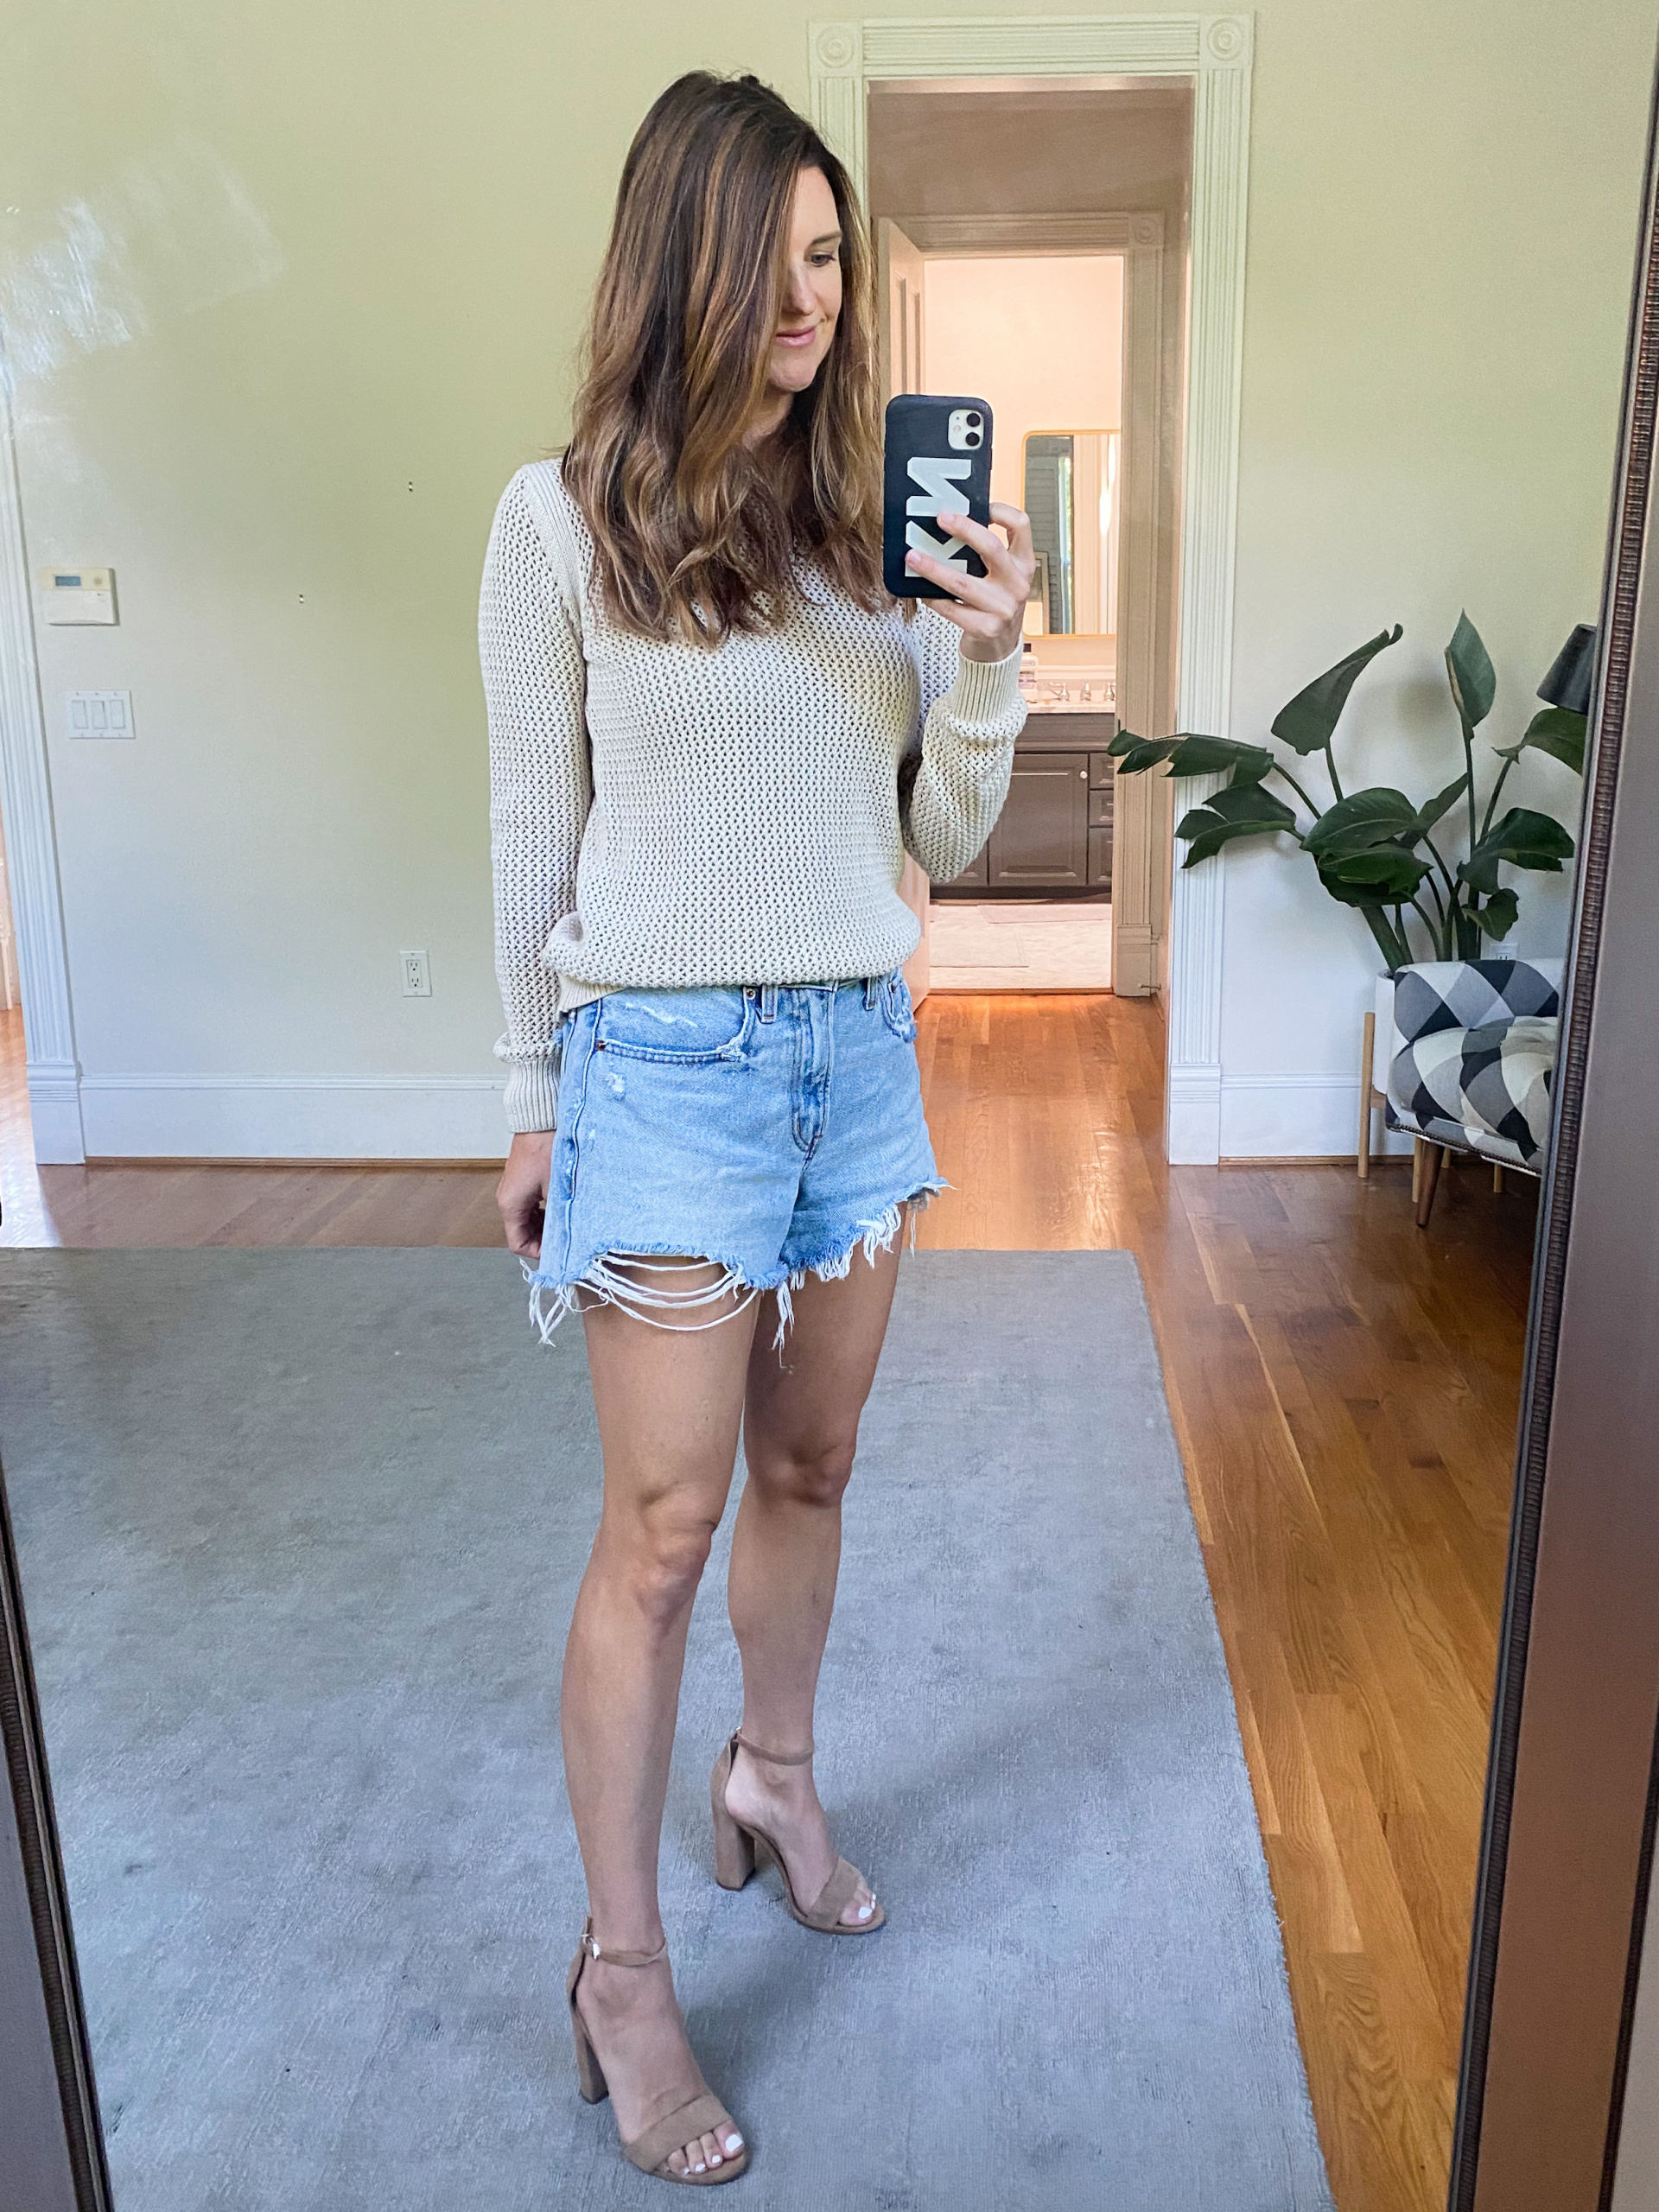 Everlane mesh sweater with denim shorts, cute outfit ideas for end of summer, finding beauty mom outfit ideas 